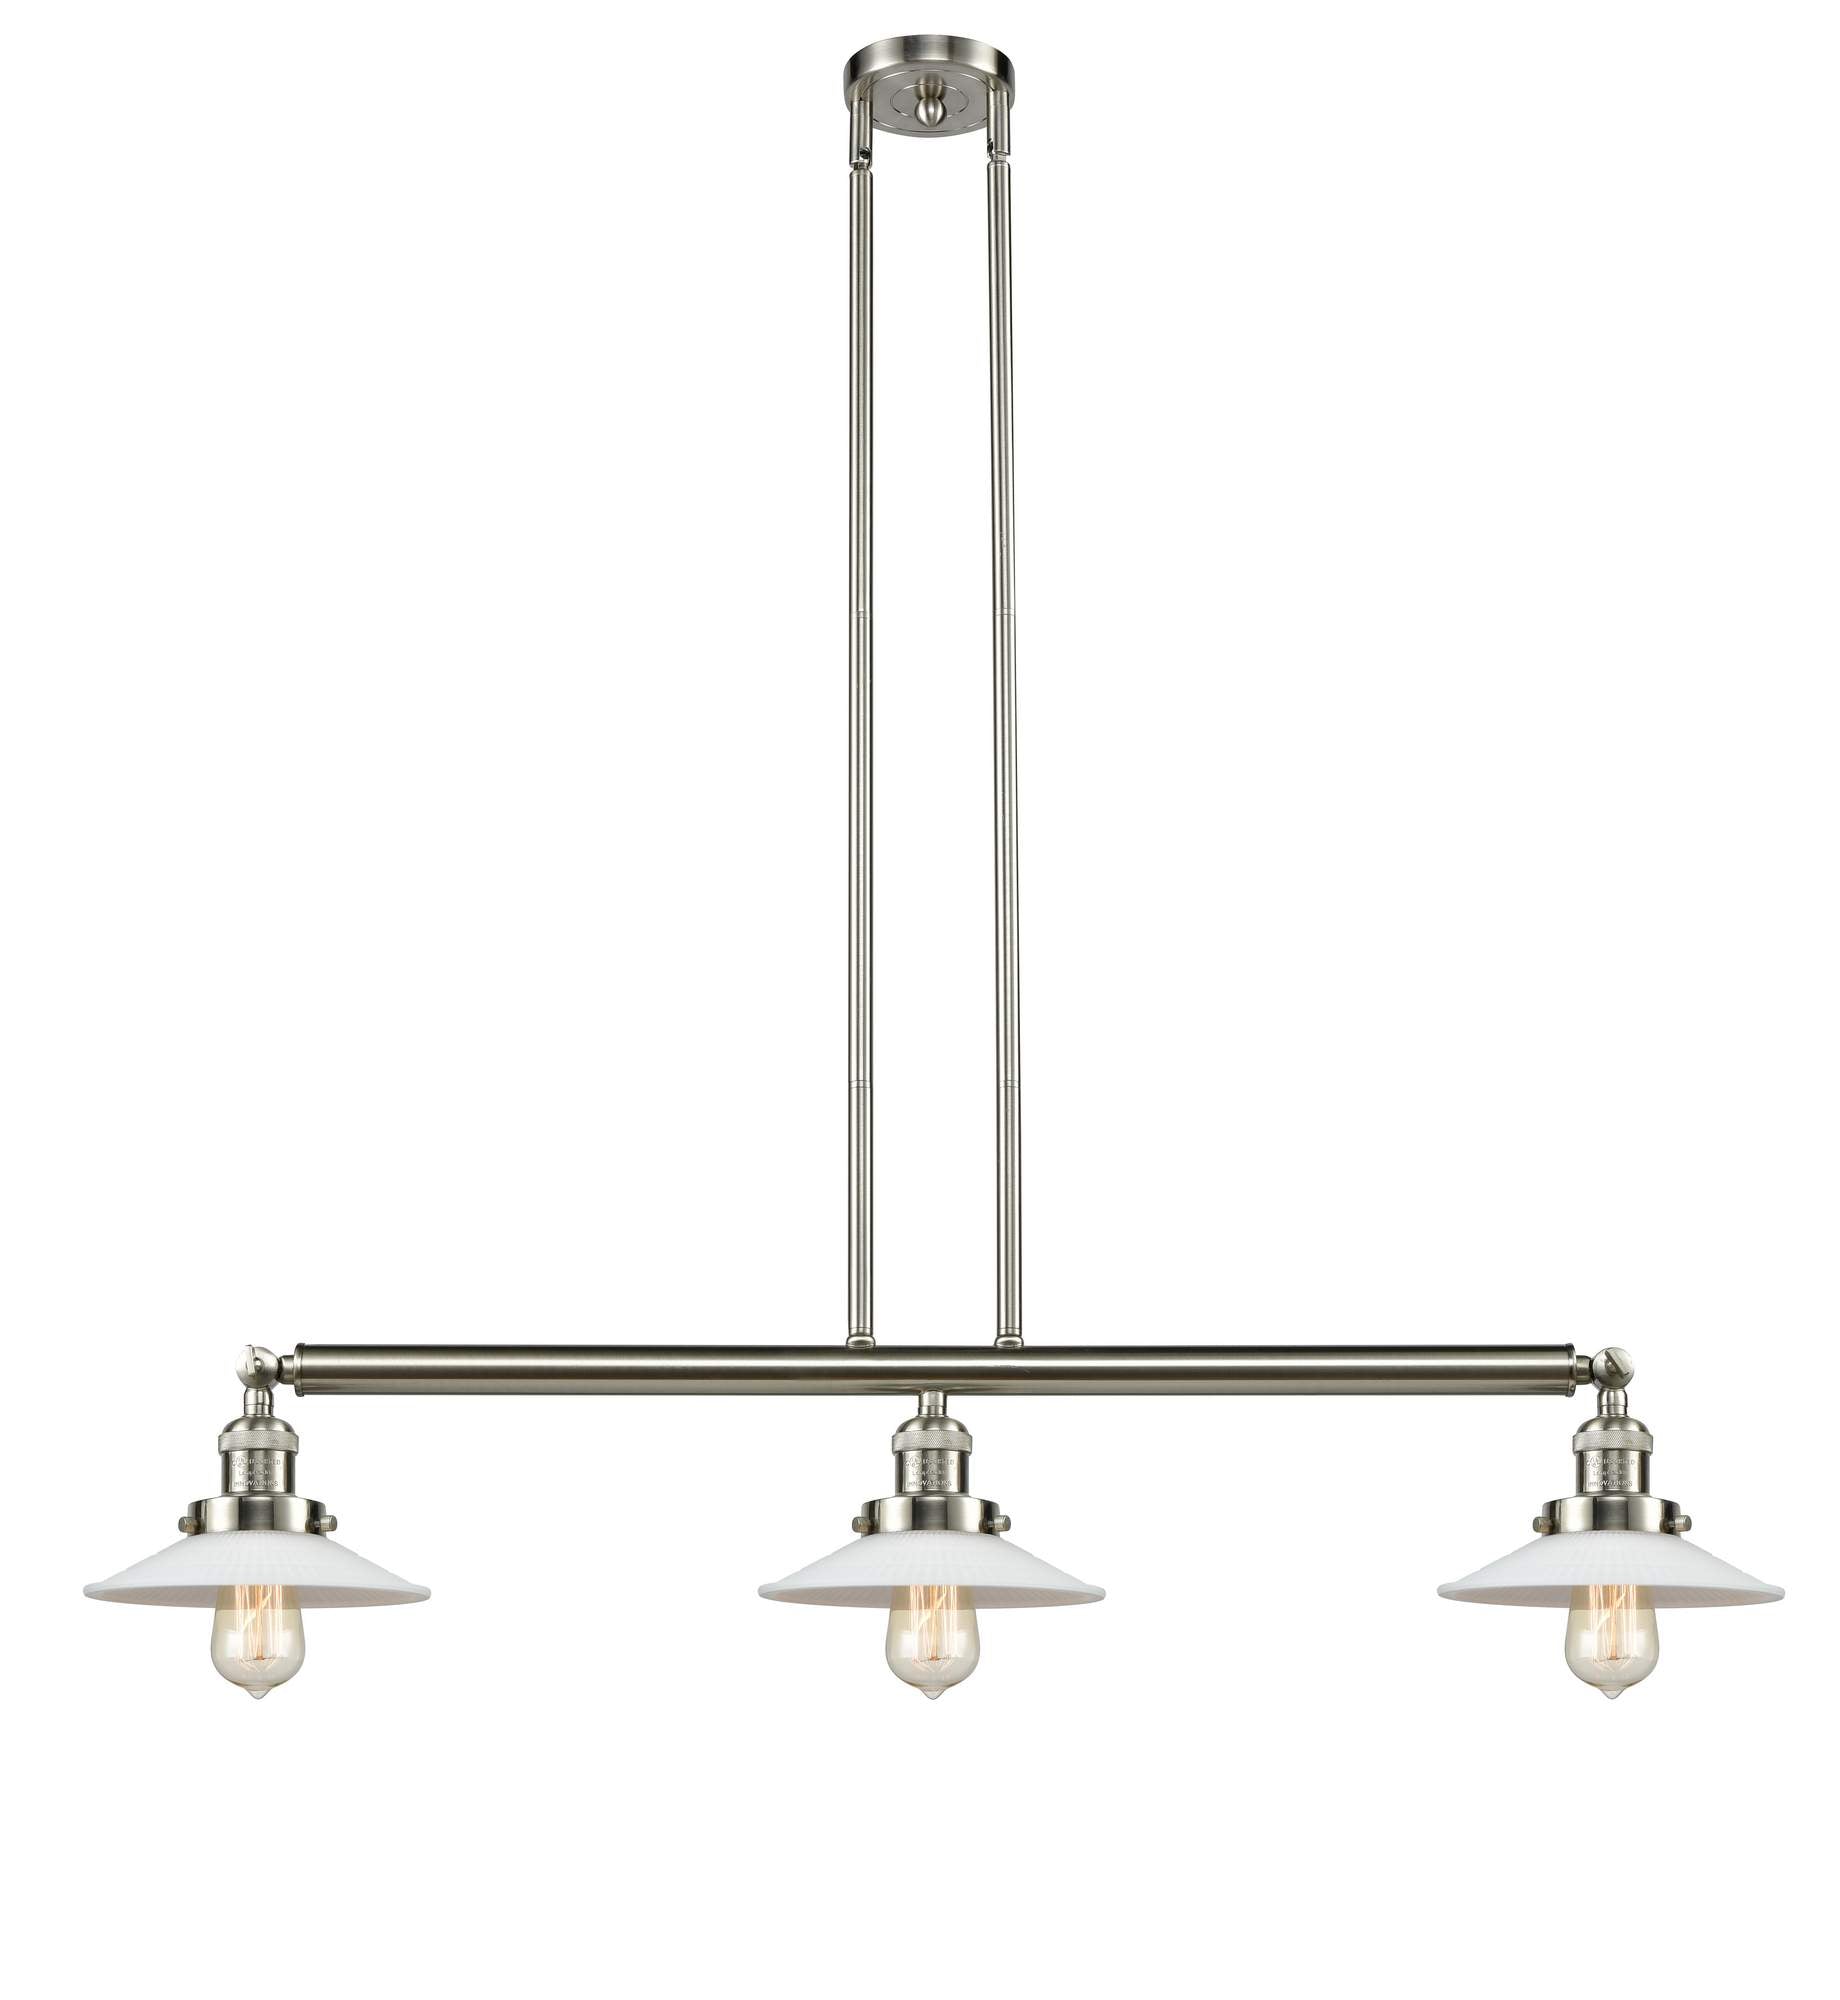 213-SN-G1 3-Light 41" Brushed Satin Nickel Island Light - White Halophane Glass - LED Bulb - Dimmensions: 41 x 8.5 x 8<br>Minimum Height : 16.25<br>Maximum Height : 40.25 - Sloped Ceiling Compatible: Yes